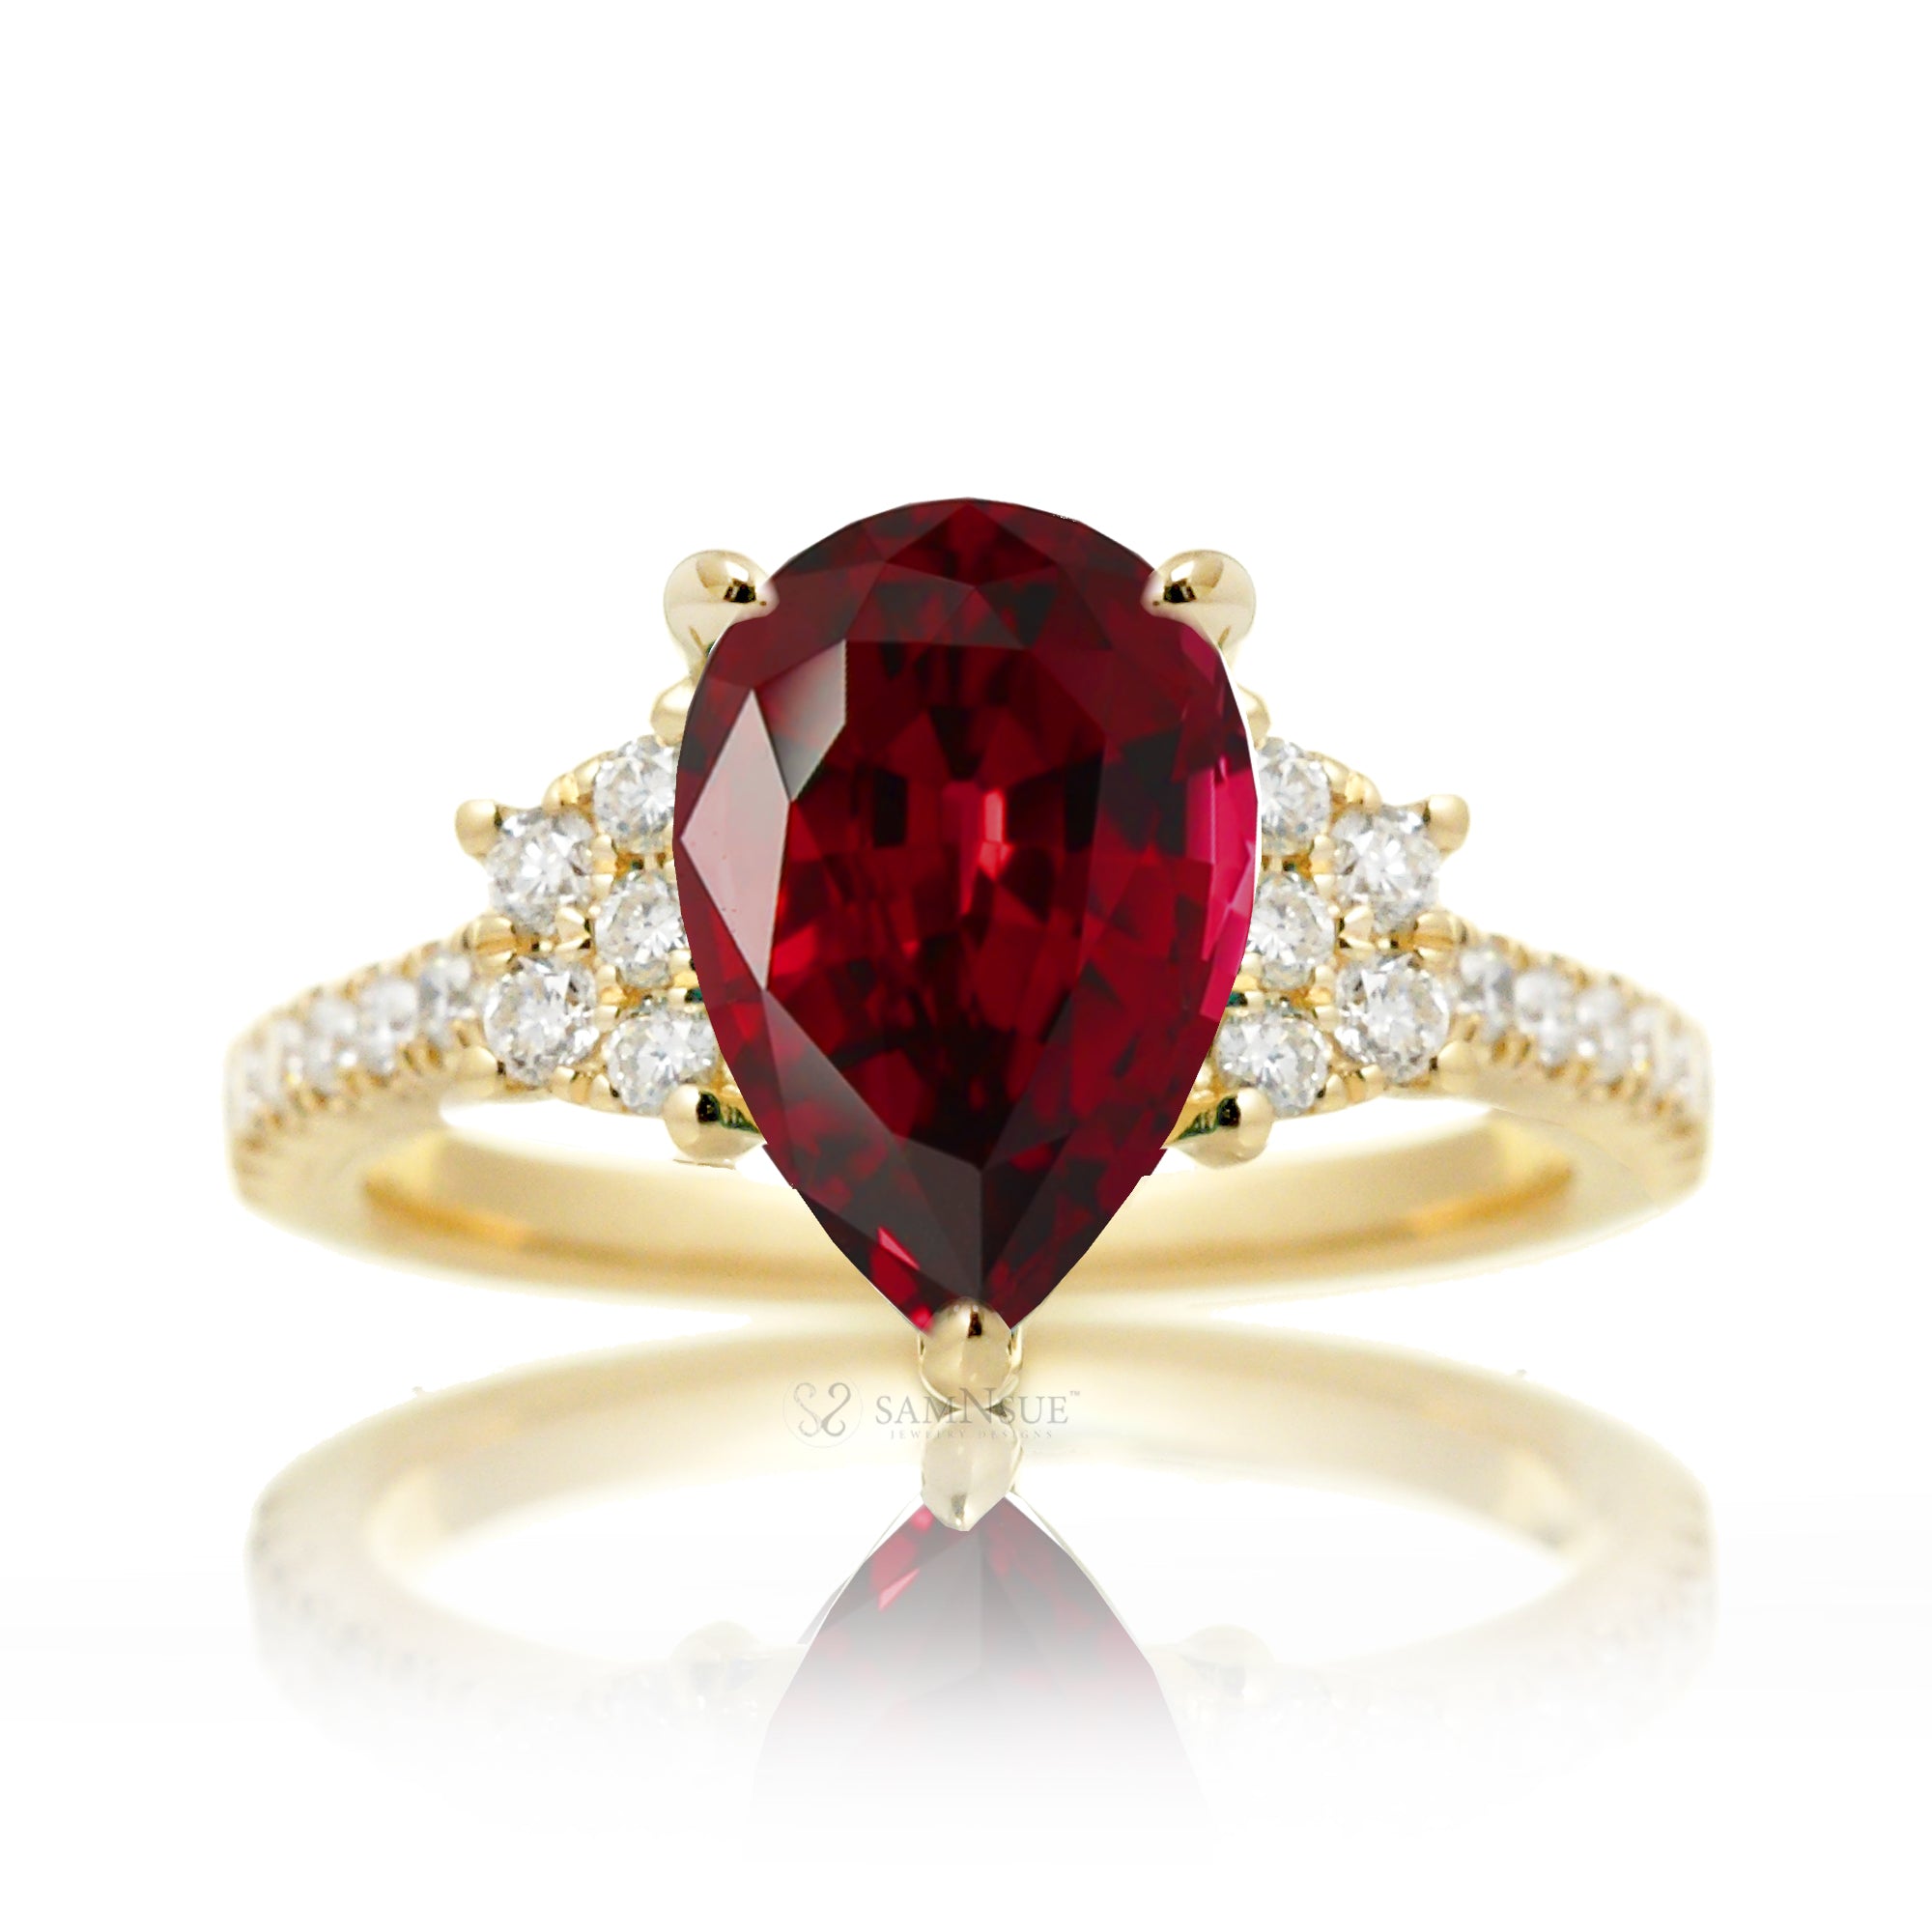 Pear cut ruby ring with trapezoid diamond side shape and band in yellow gold